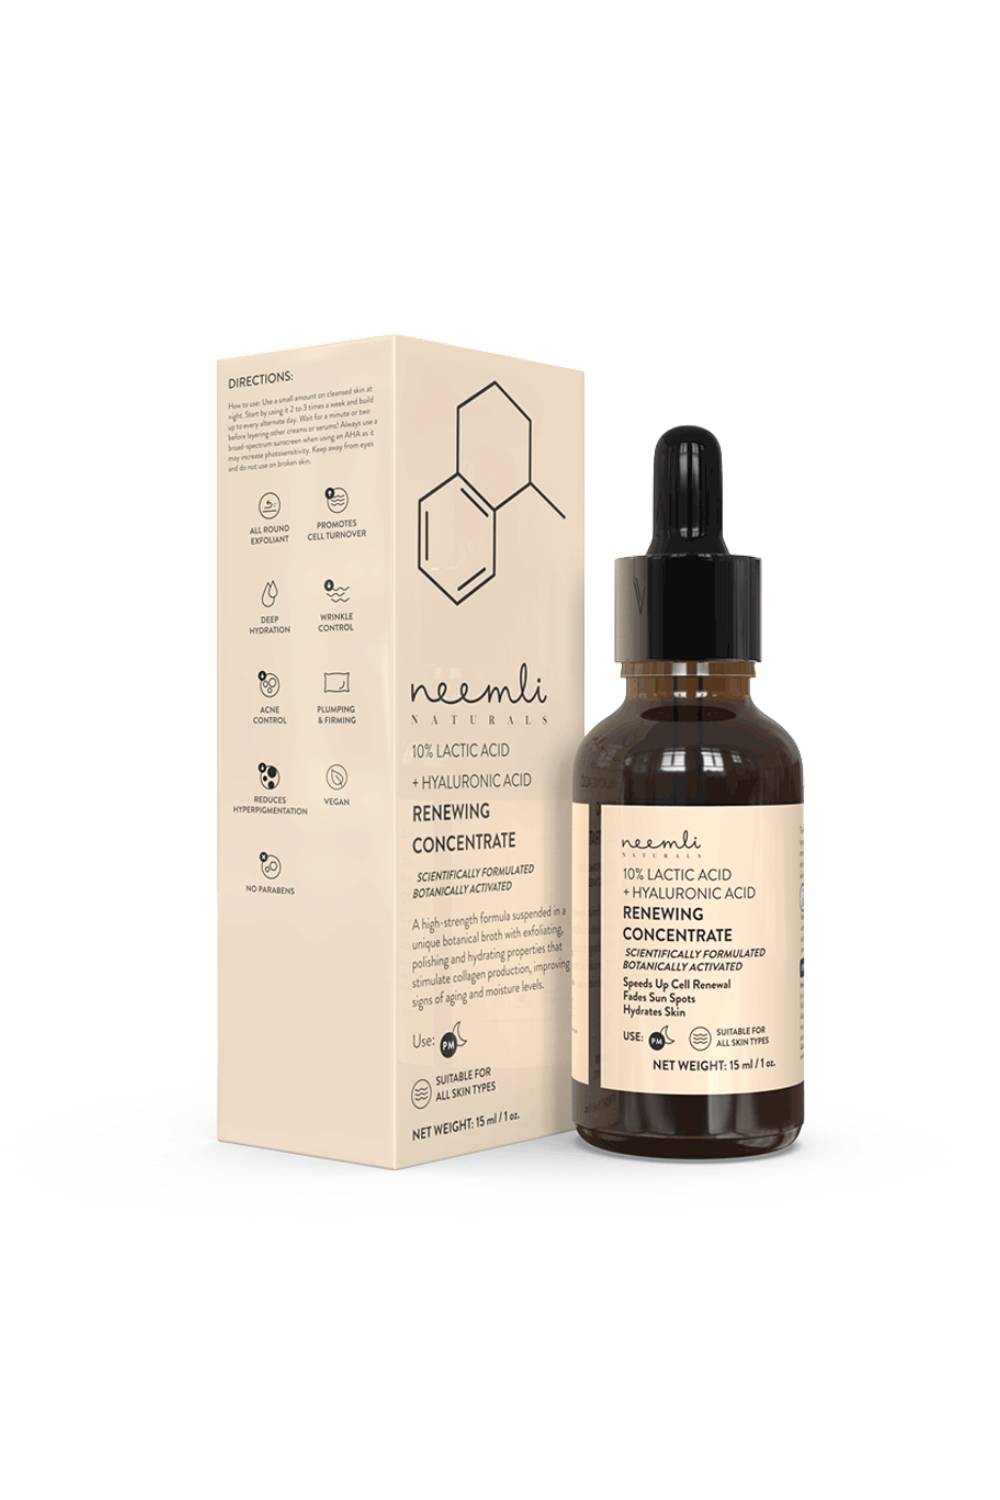 10% Lactic Acid + Hyaluronic Acid Renewing Concentrate-15ml